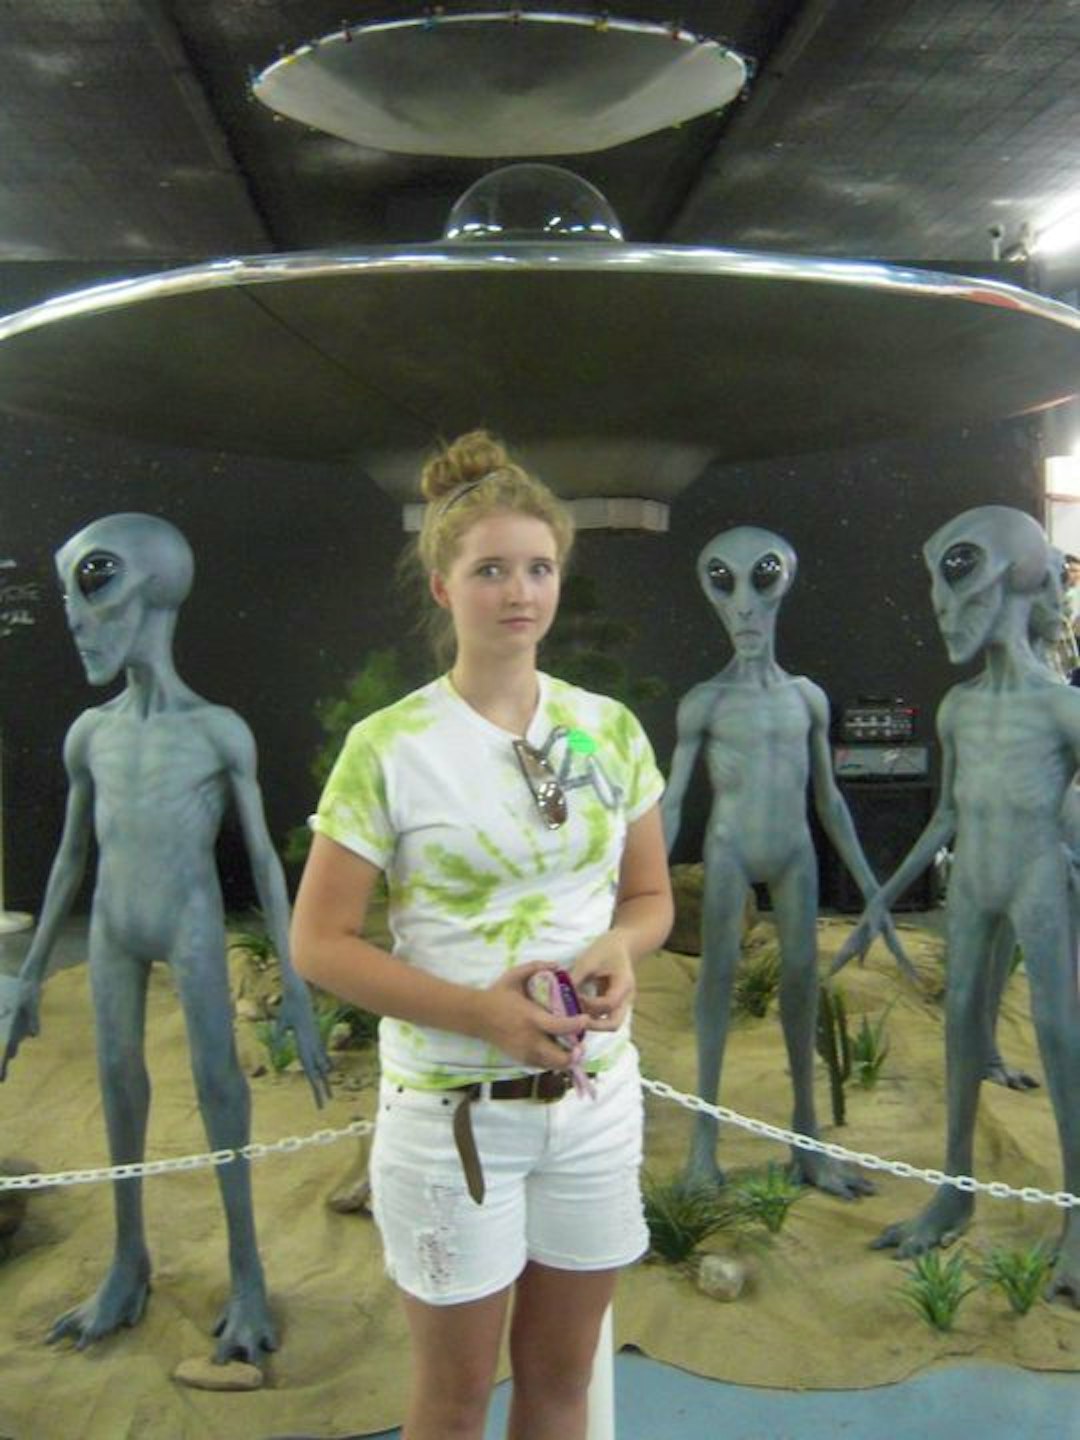 This is my sister, Pauline, at the Roswell UFO Museum in 2012.